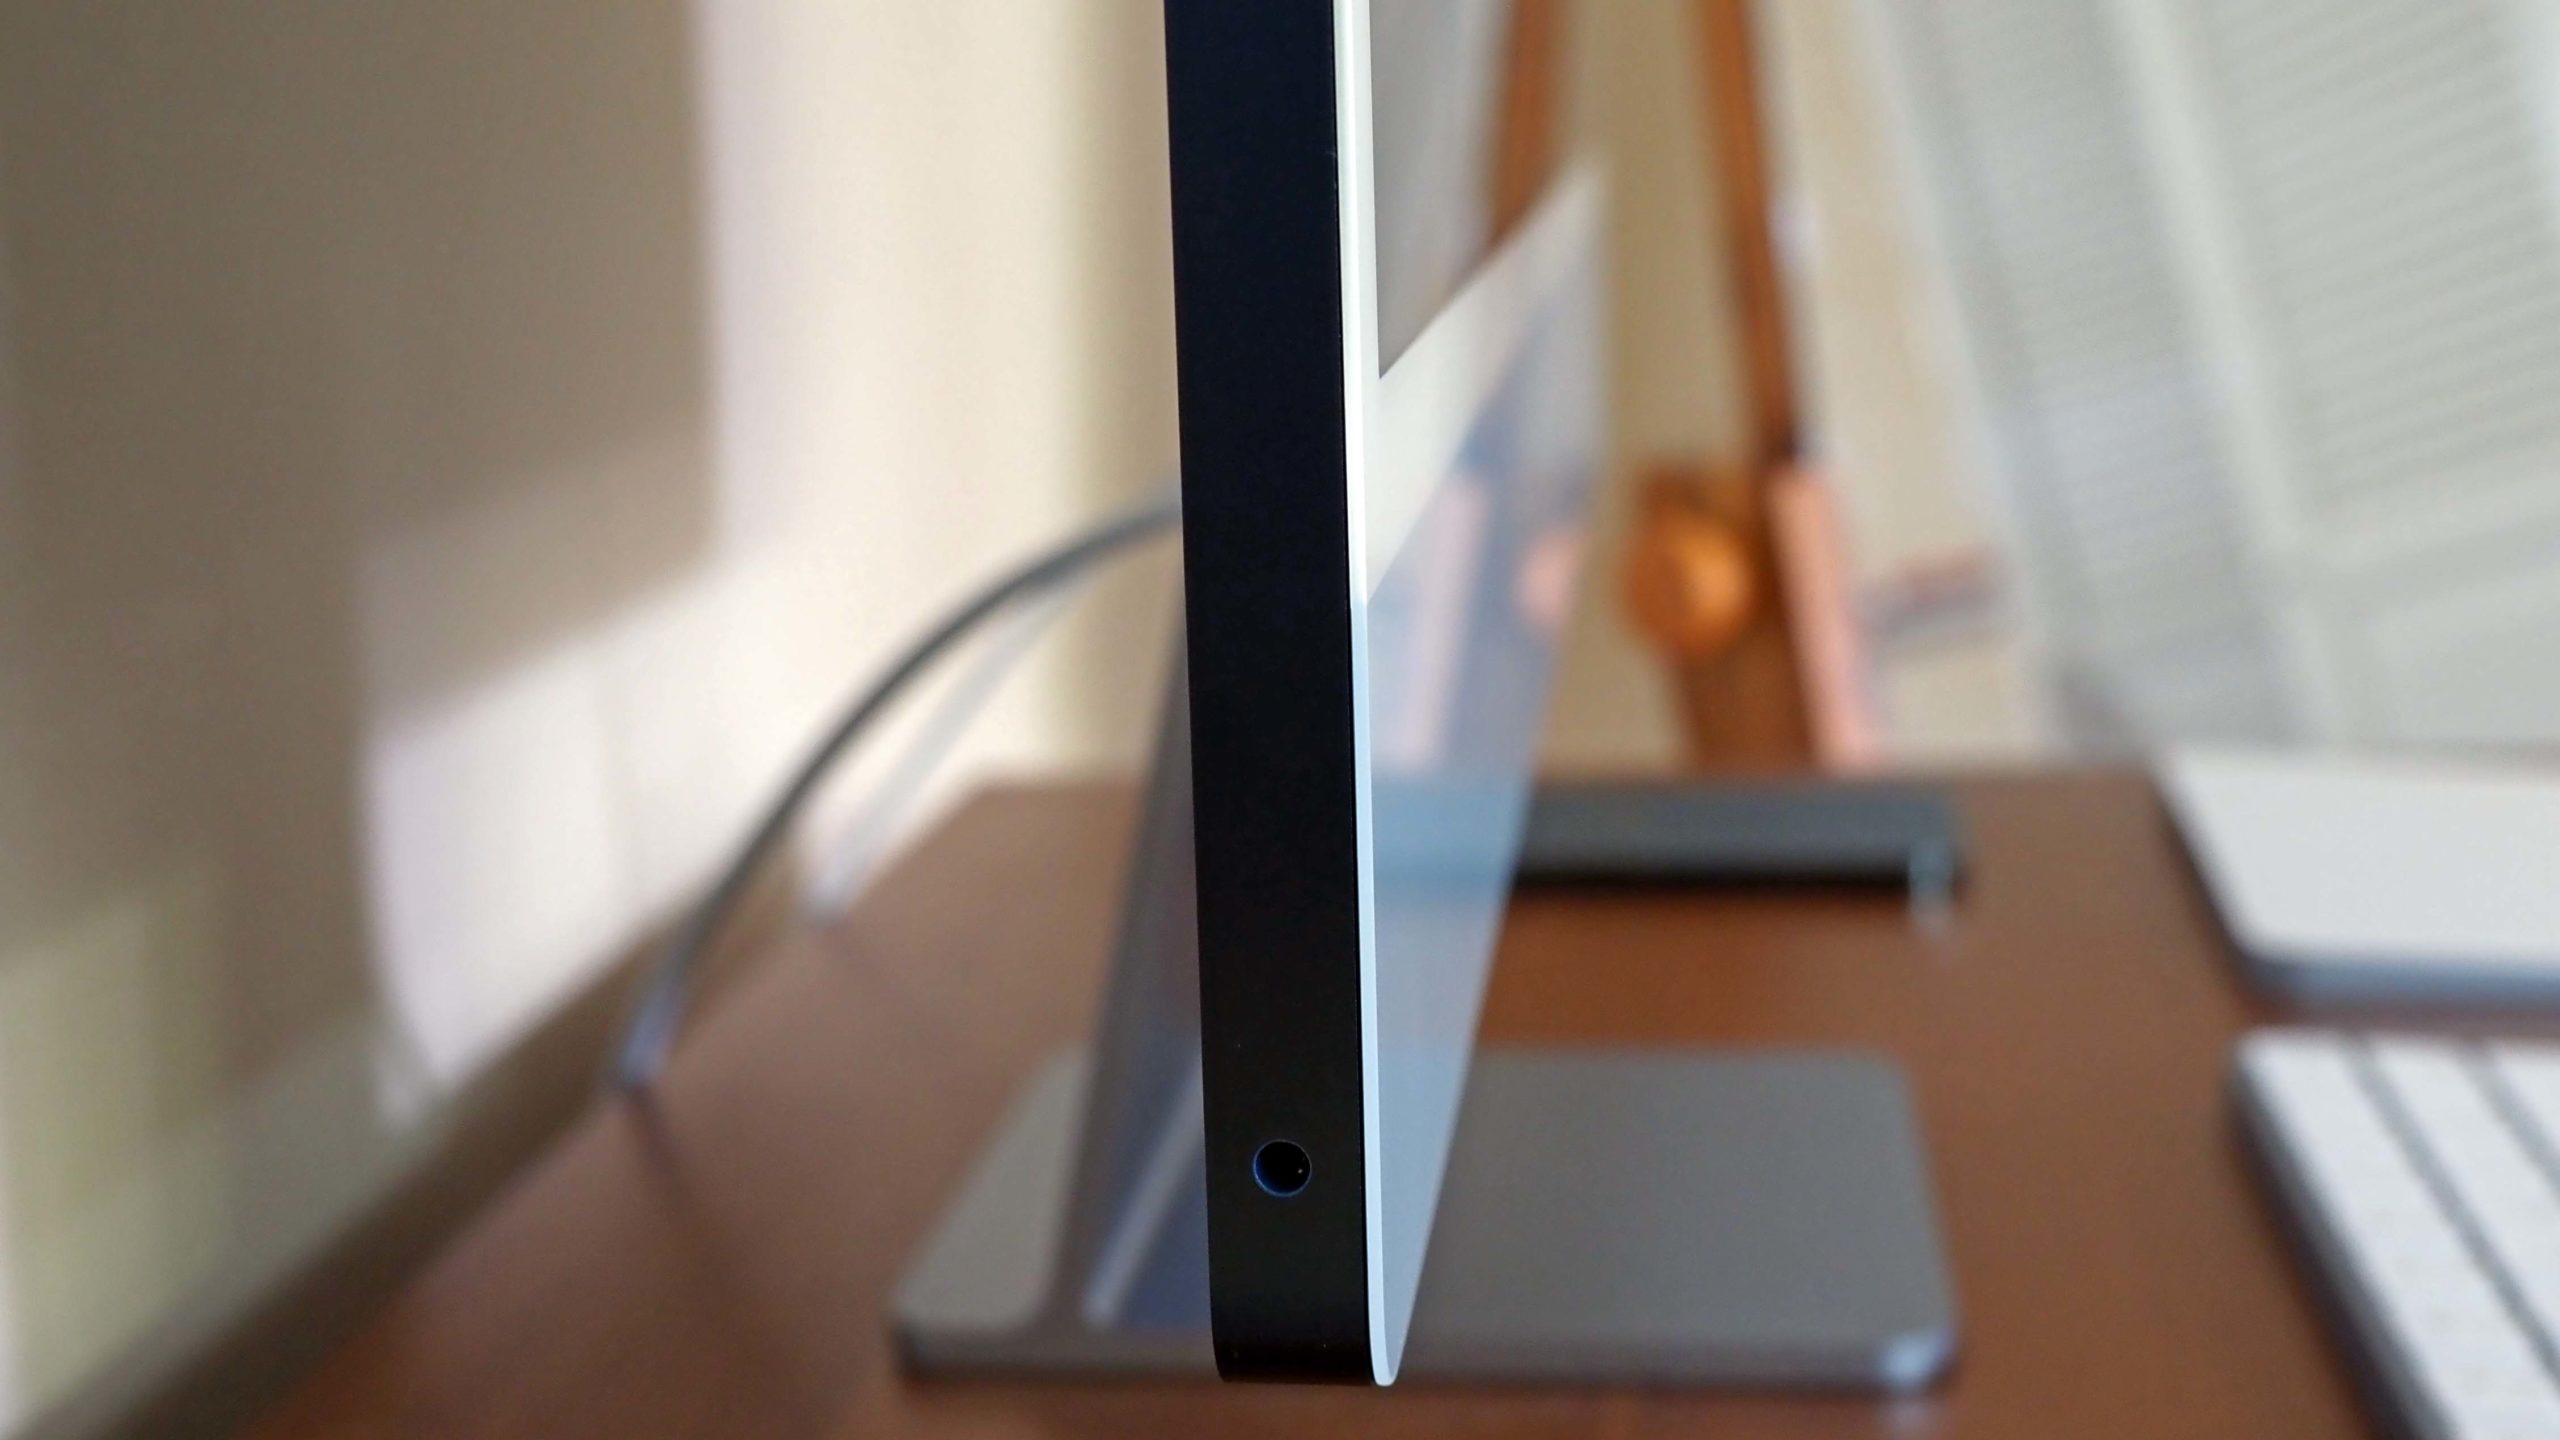 It's hard to believe how compact this thing is. (Photo: Caitlin McGarry/Gizmodo)